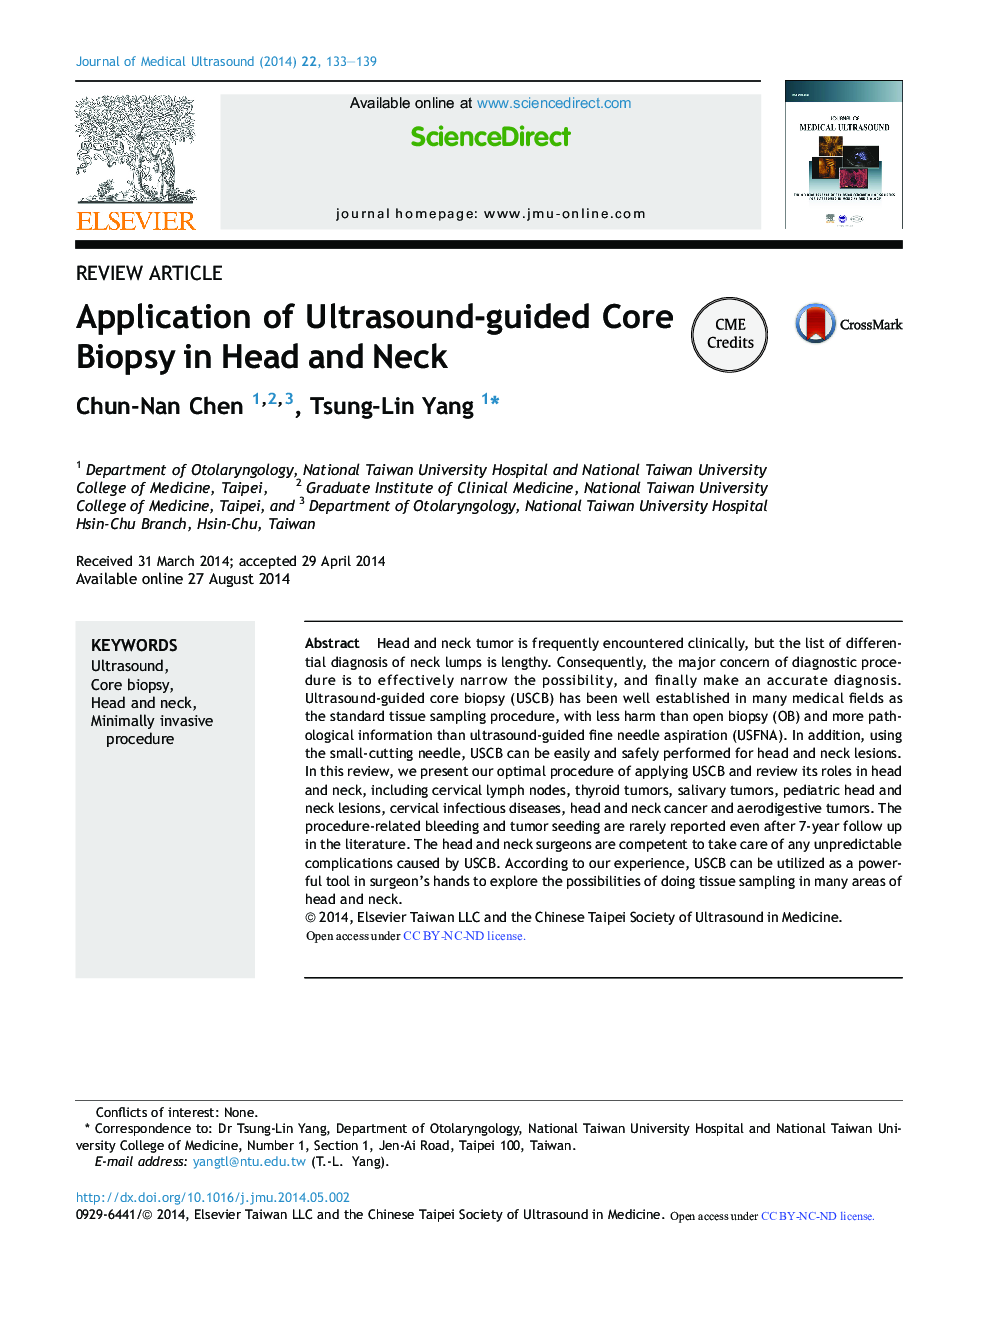 Application of Ultrasound-guided Core Biopsy in Head and Neck 